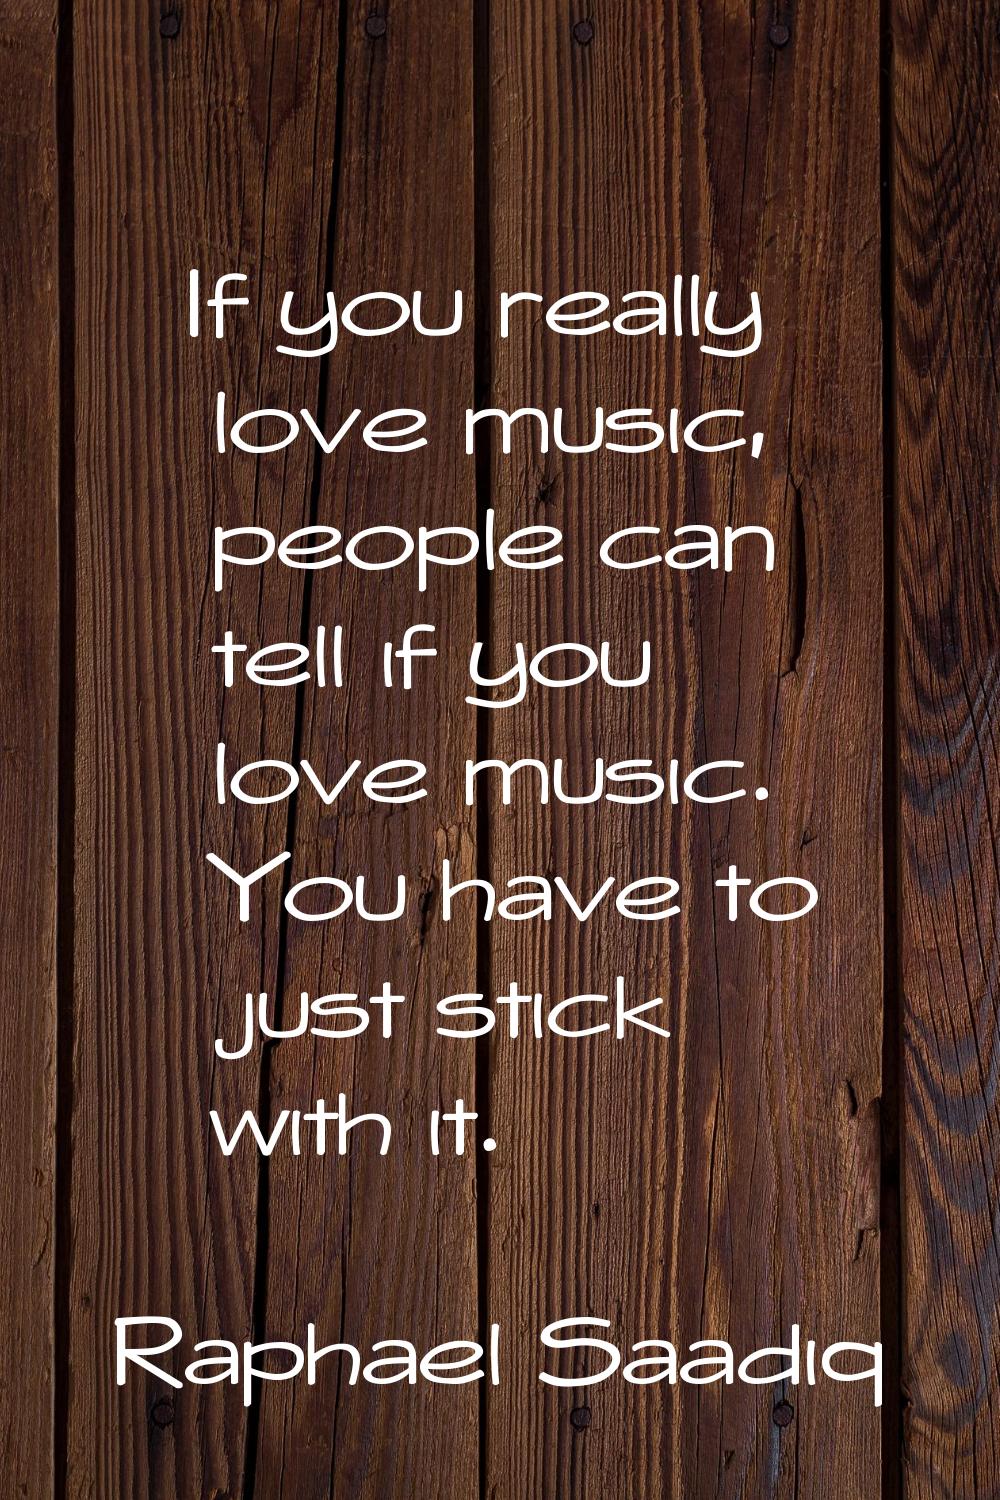 If you really love music, people can tell if you love music. You have to just stick with it.